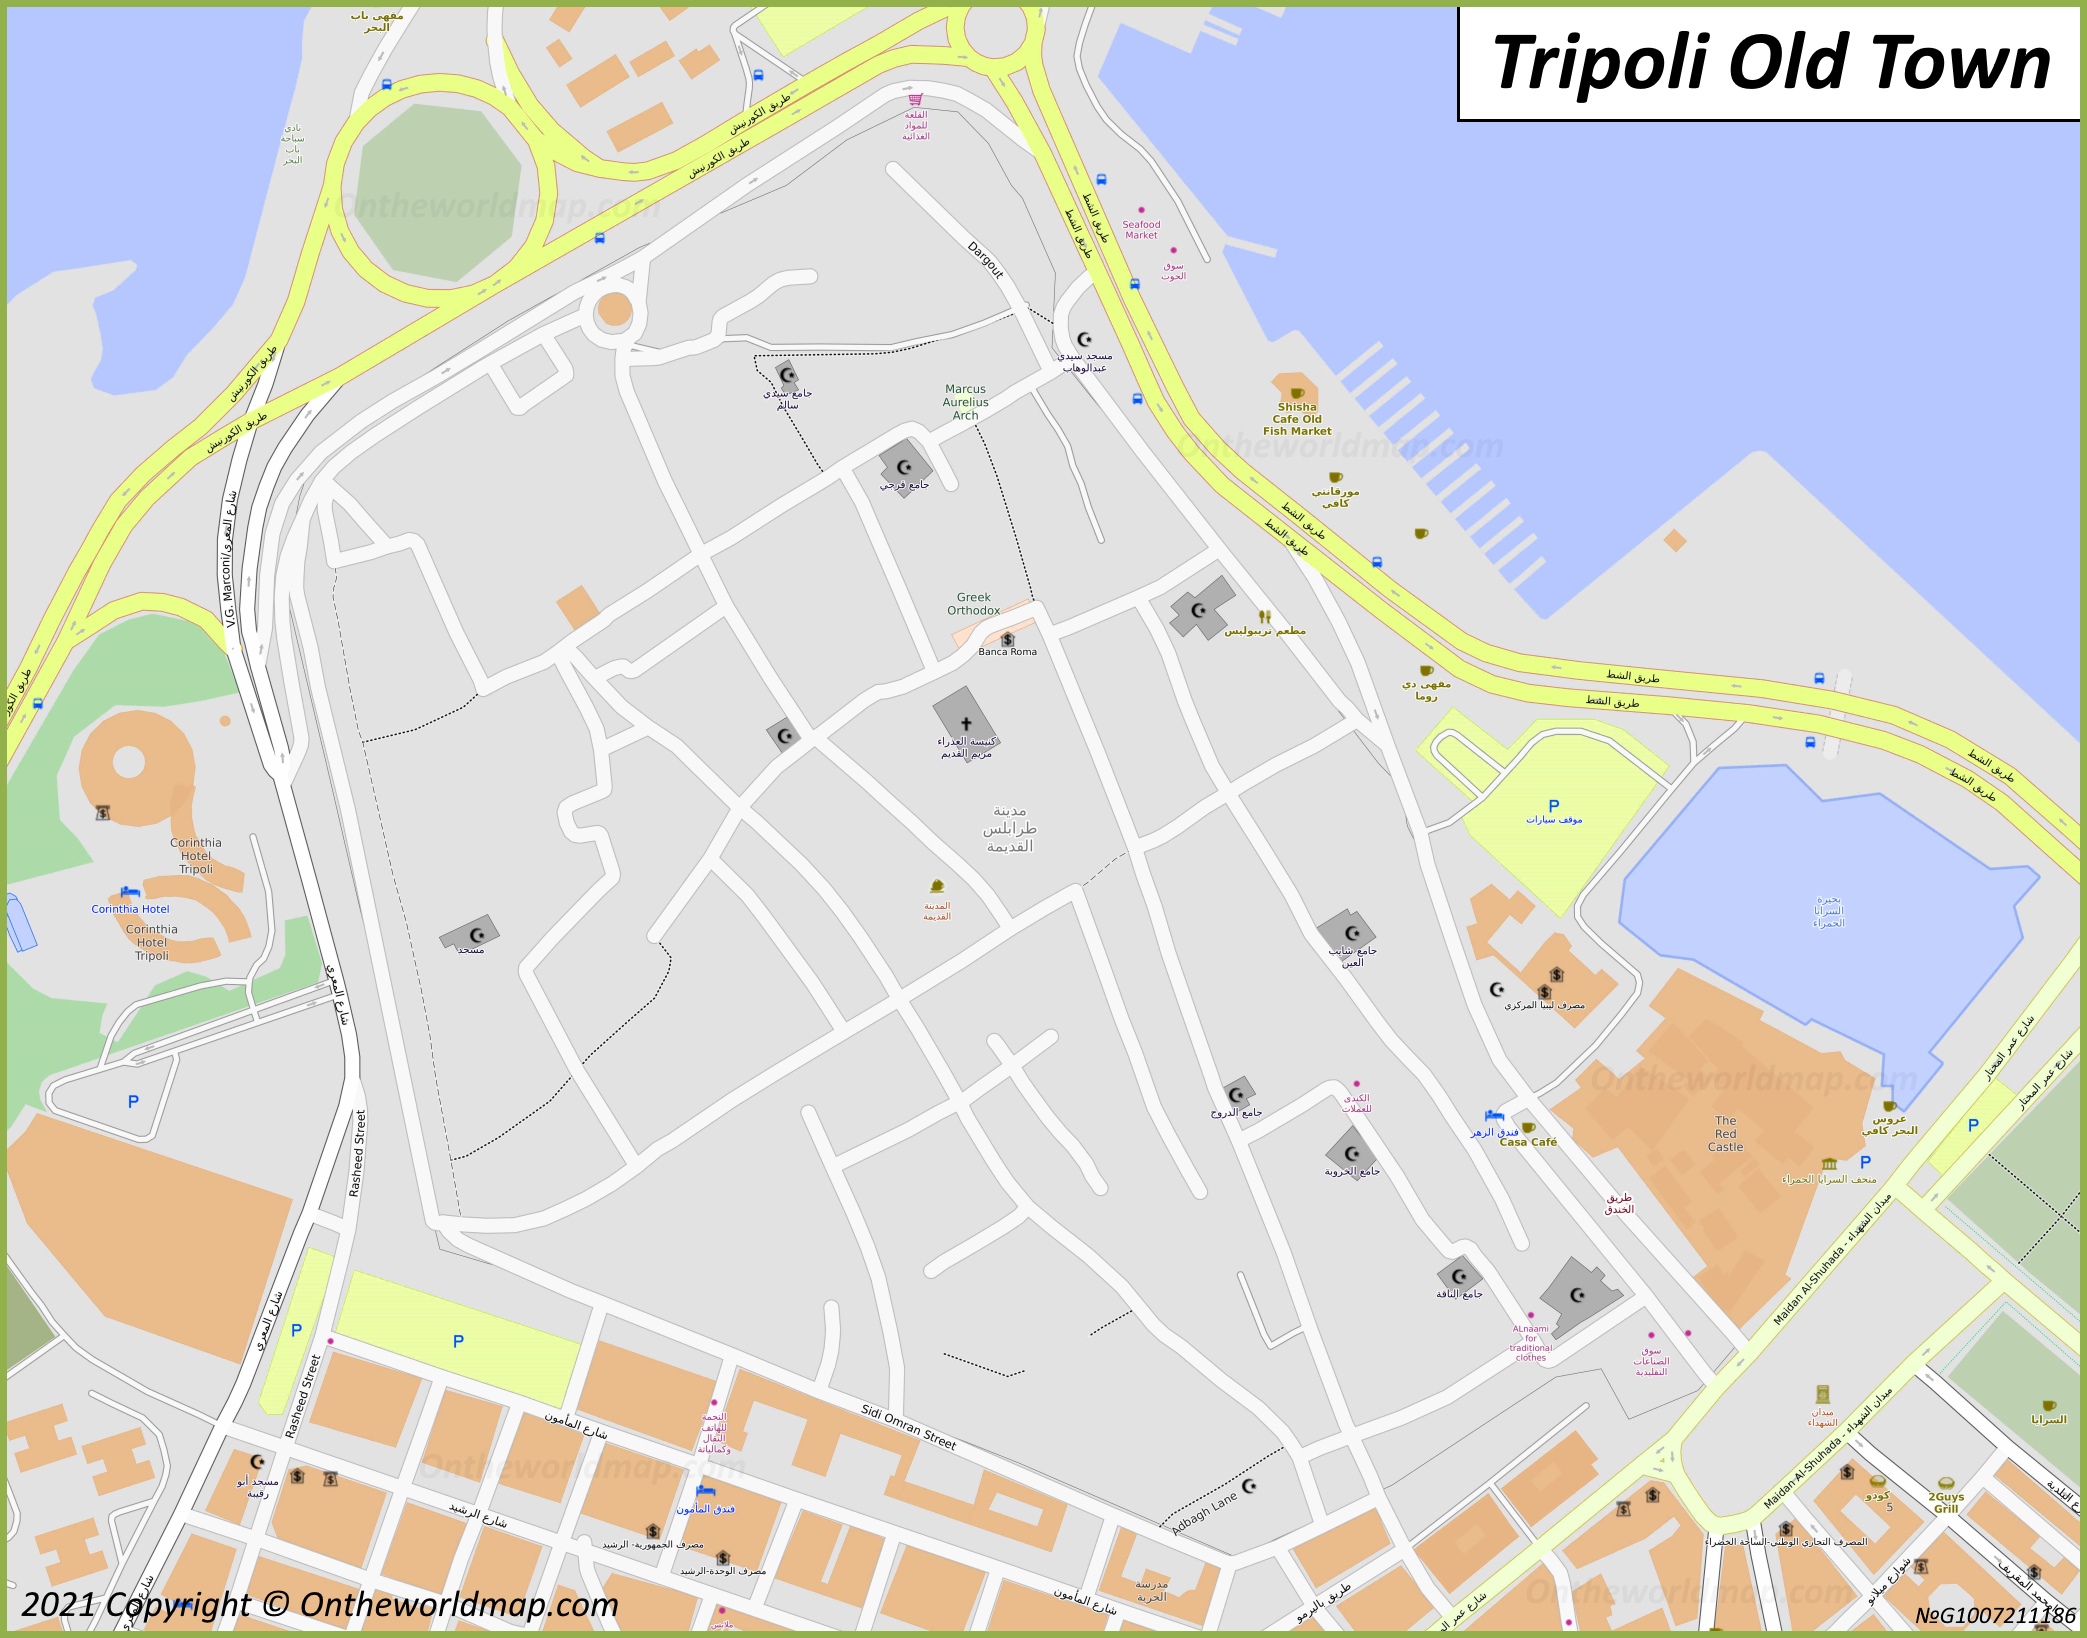 Tripoli Old Town Map